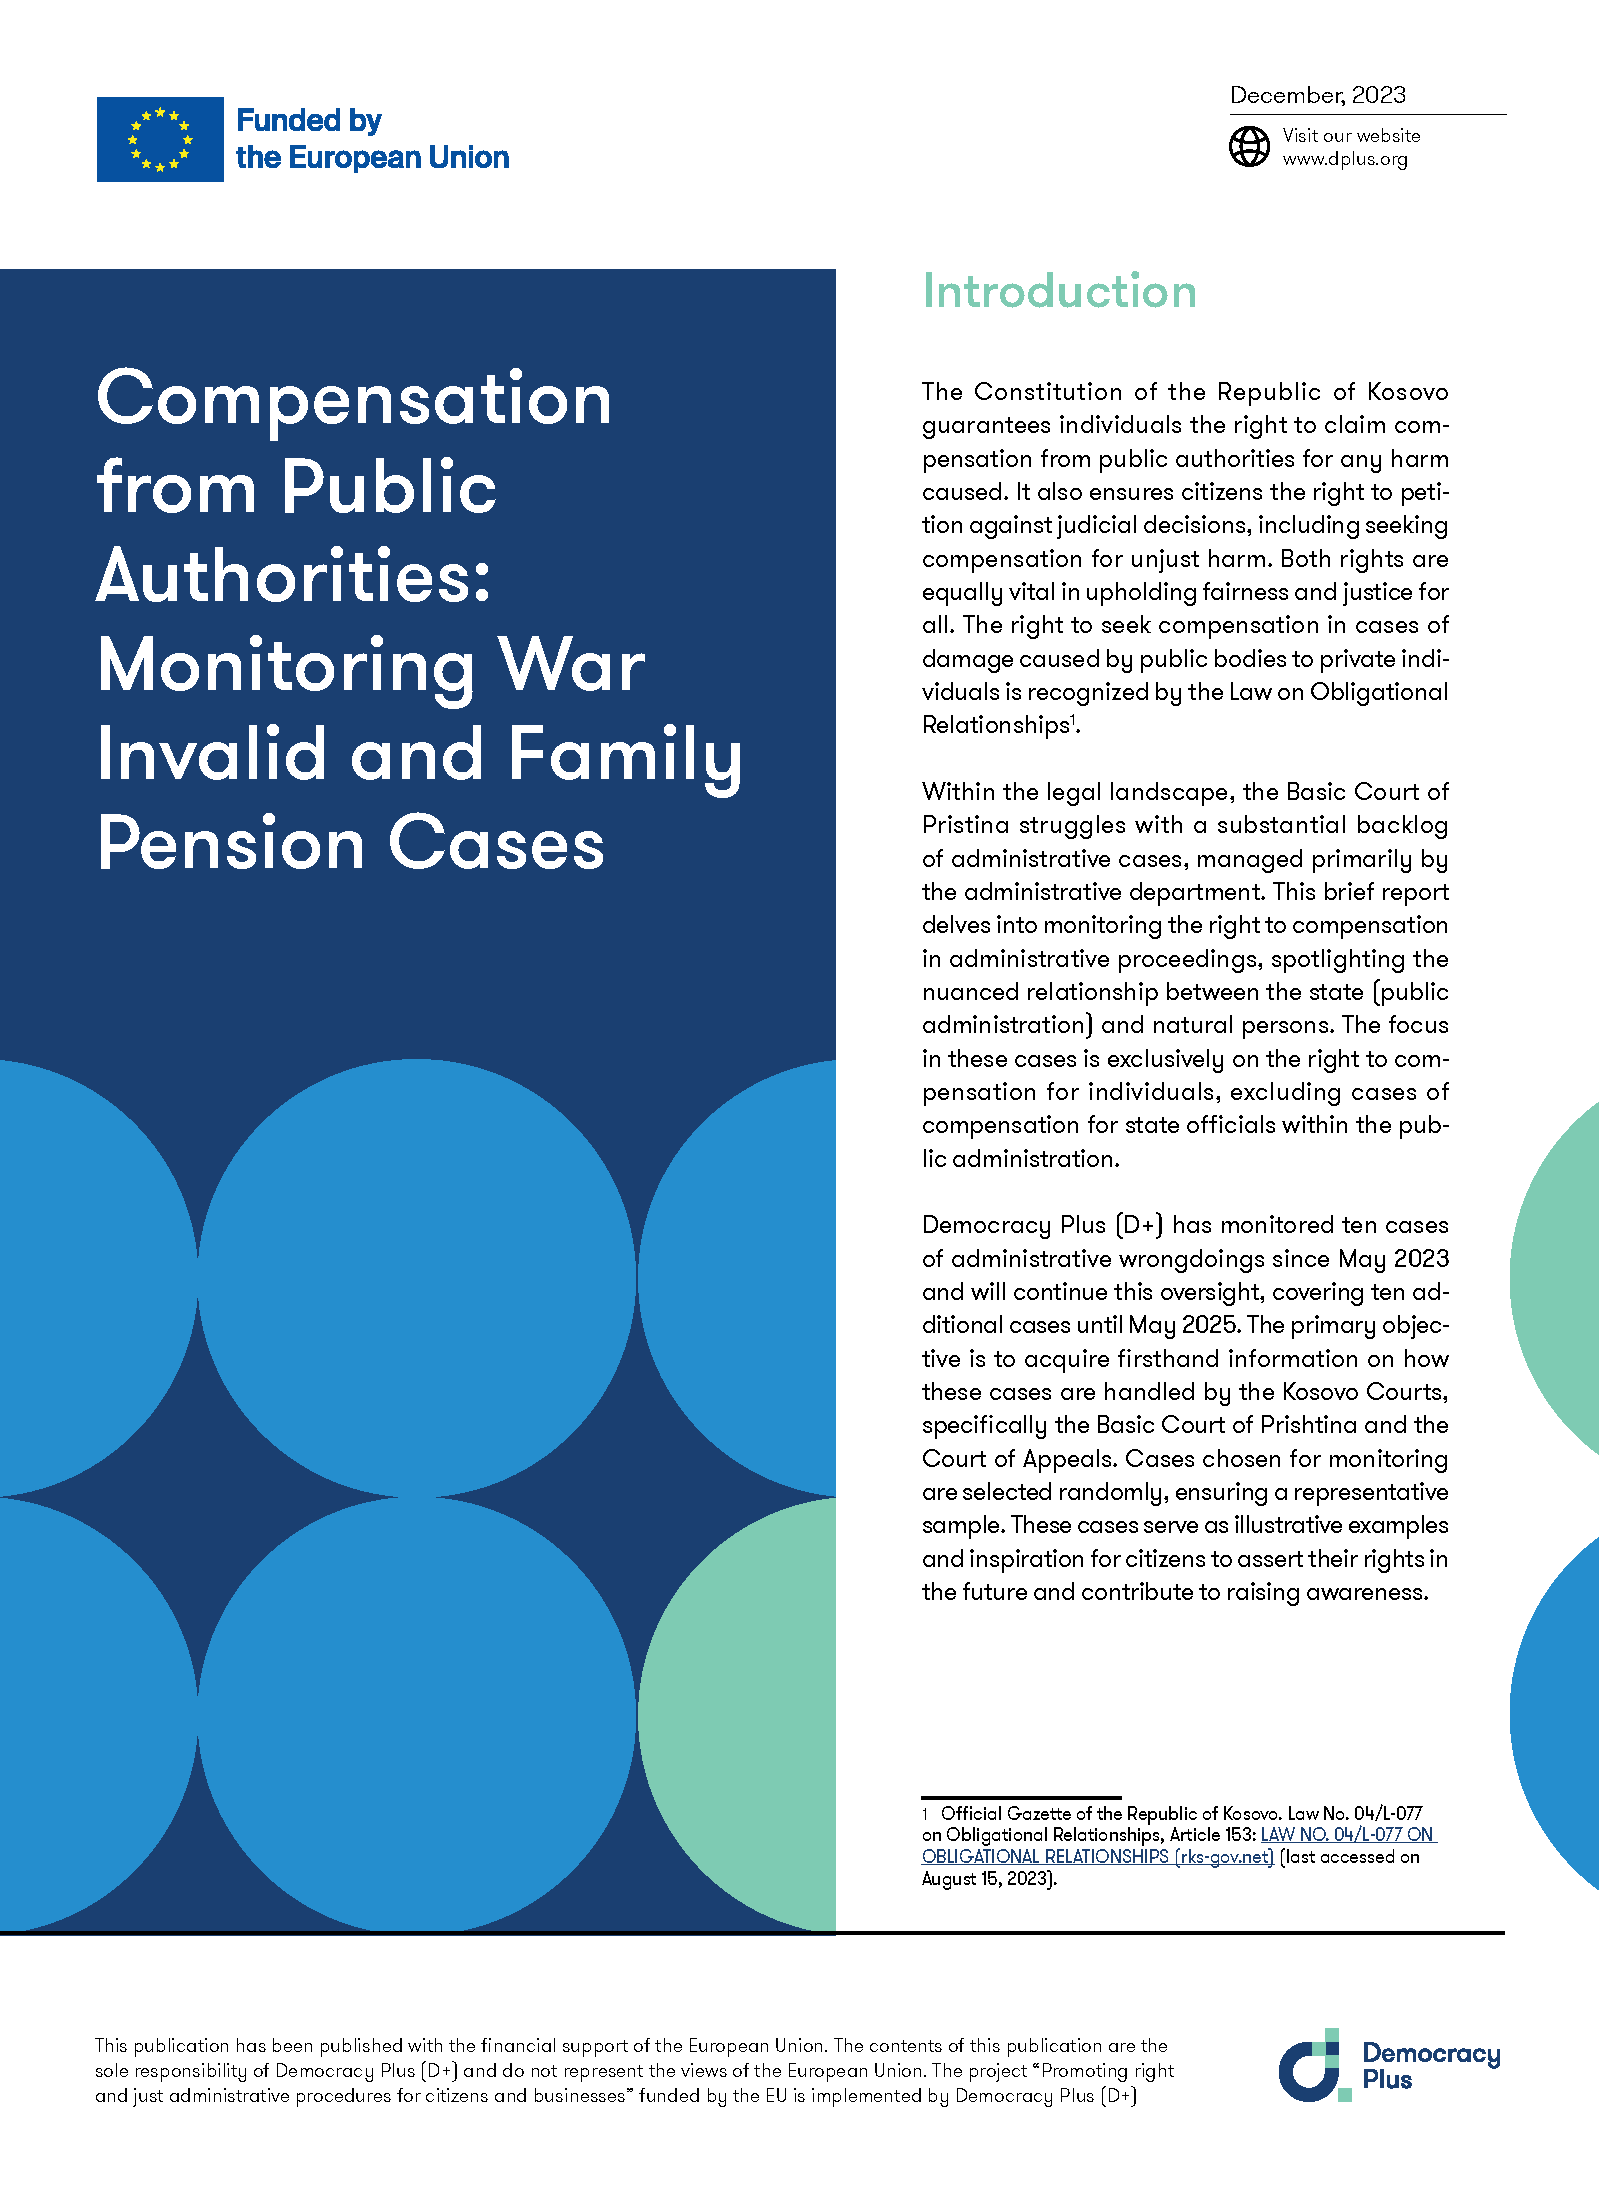 Compensation from Public Authorities: Monitoring War Invalid and Family Pension Cases